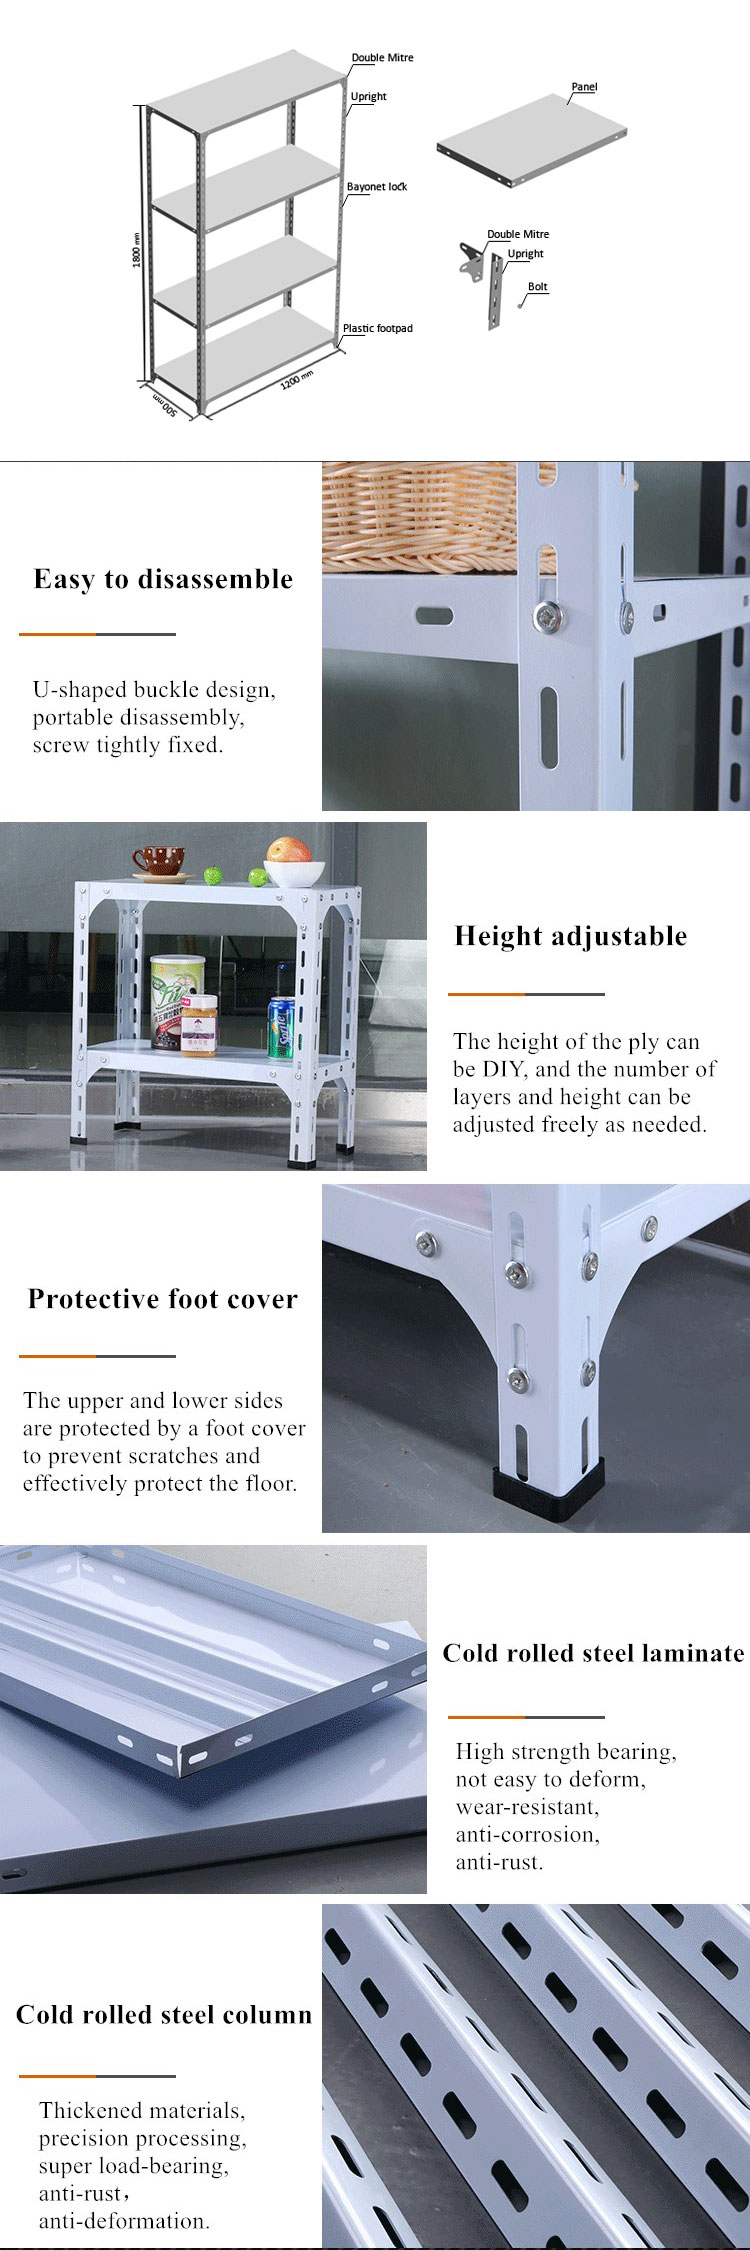 Details of Slotted Angle Shelving